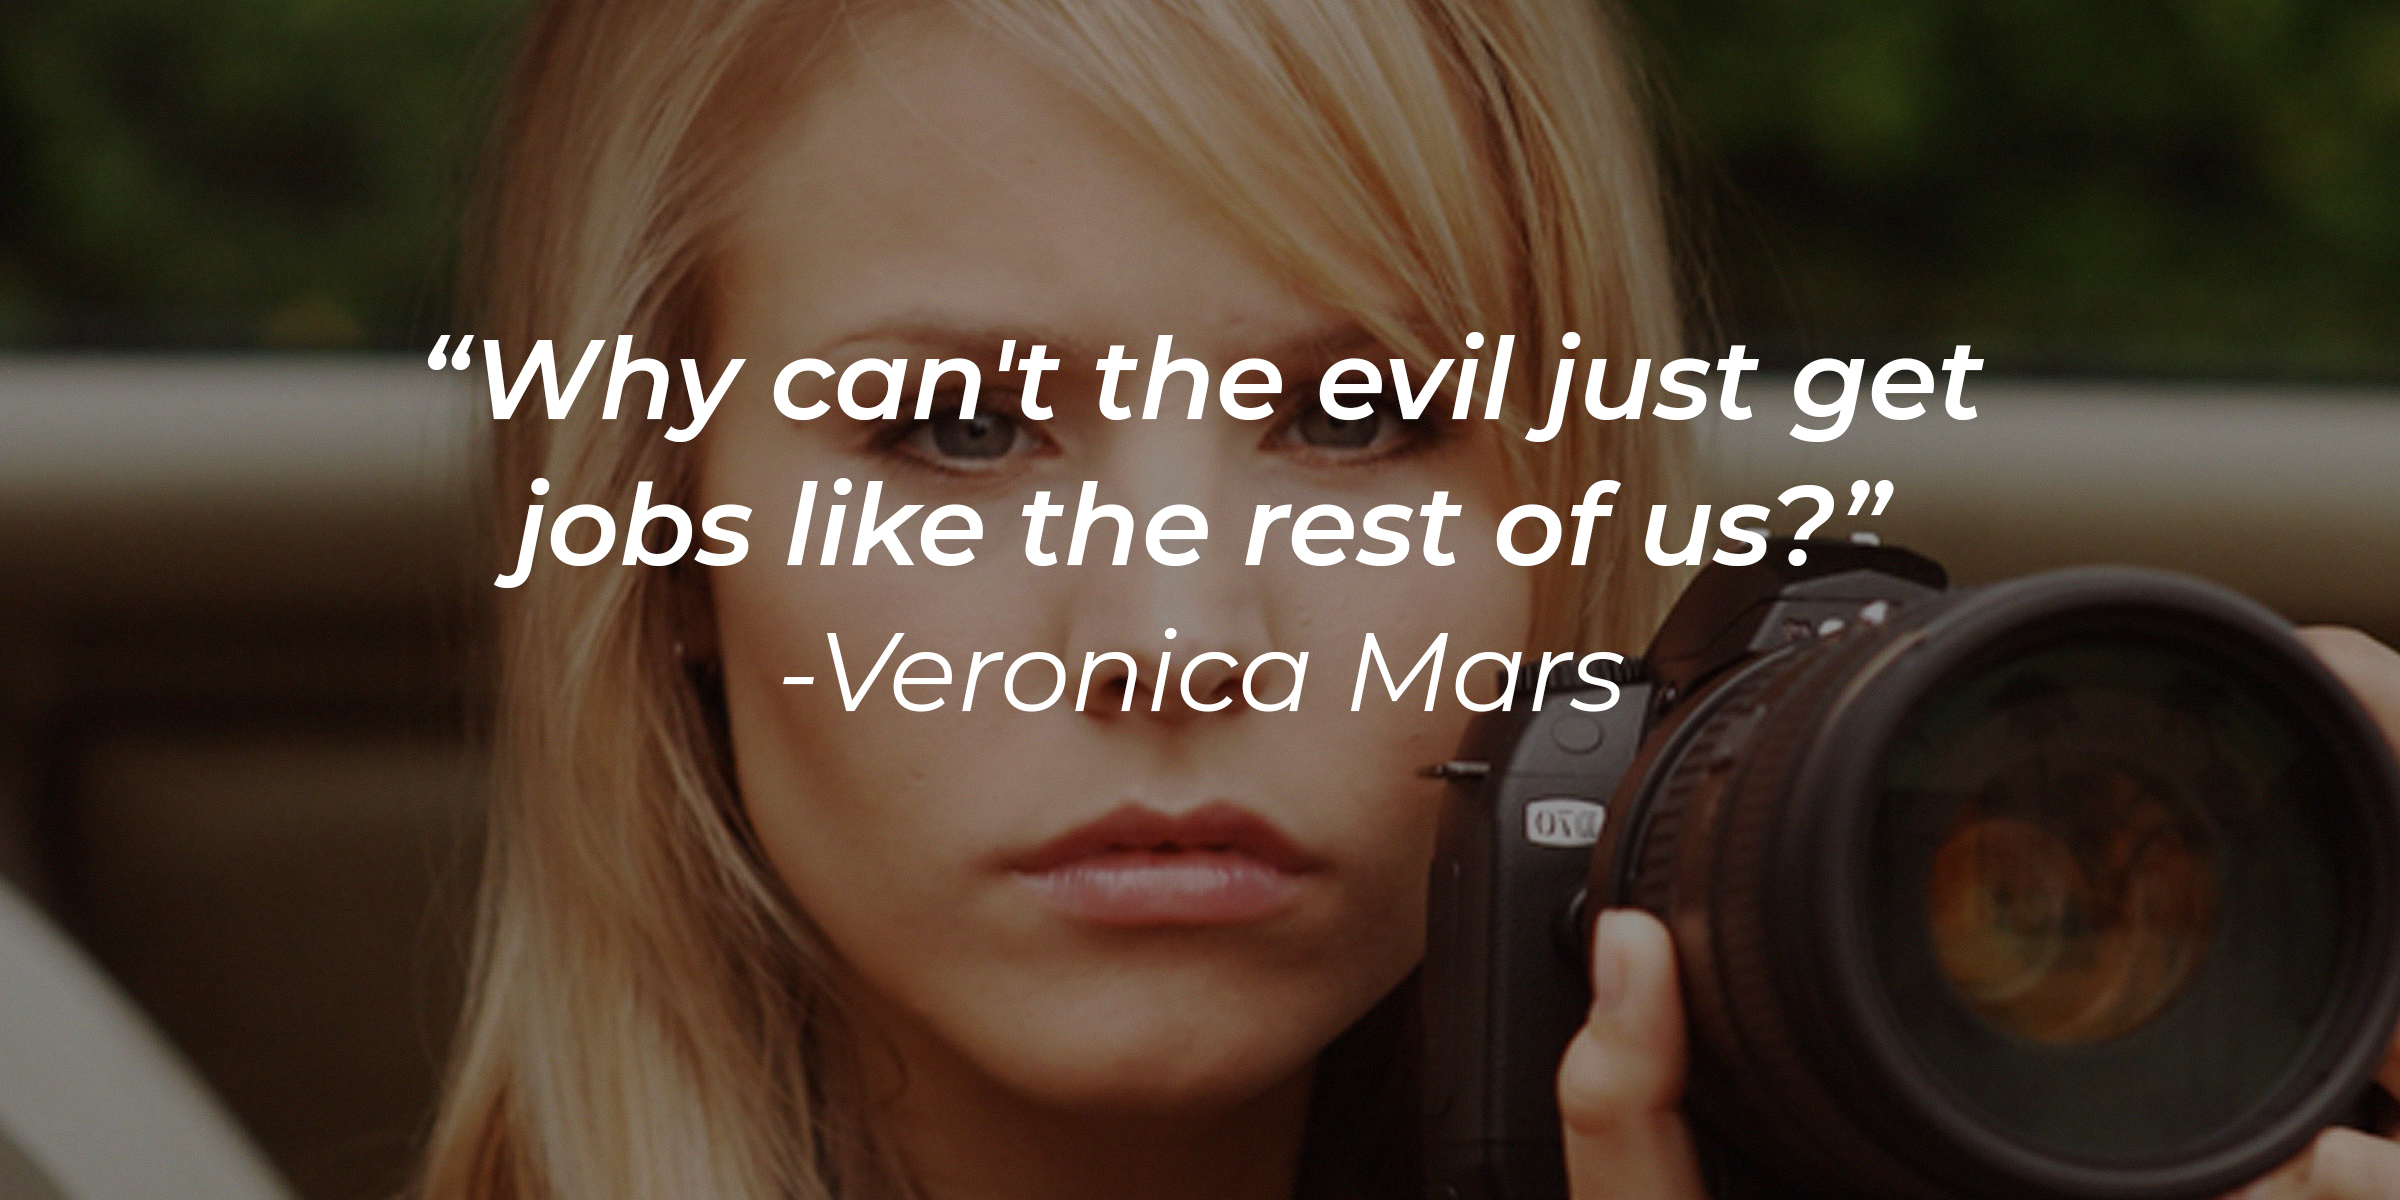 A photo of Veronica Mars with the quote: “Why can't the evil just get jobs like the rest of us?” | Source: facebook.com/VeronicaMars